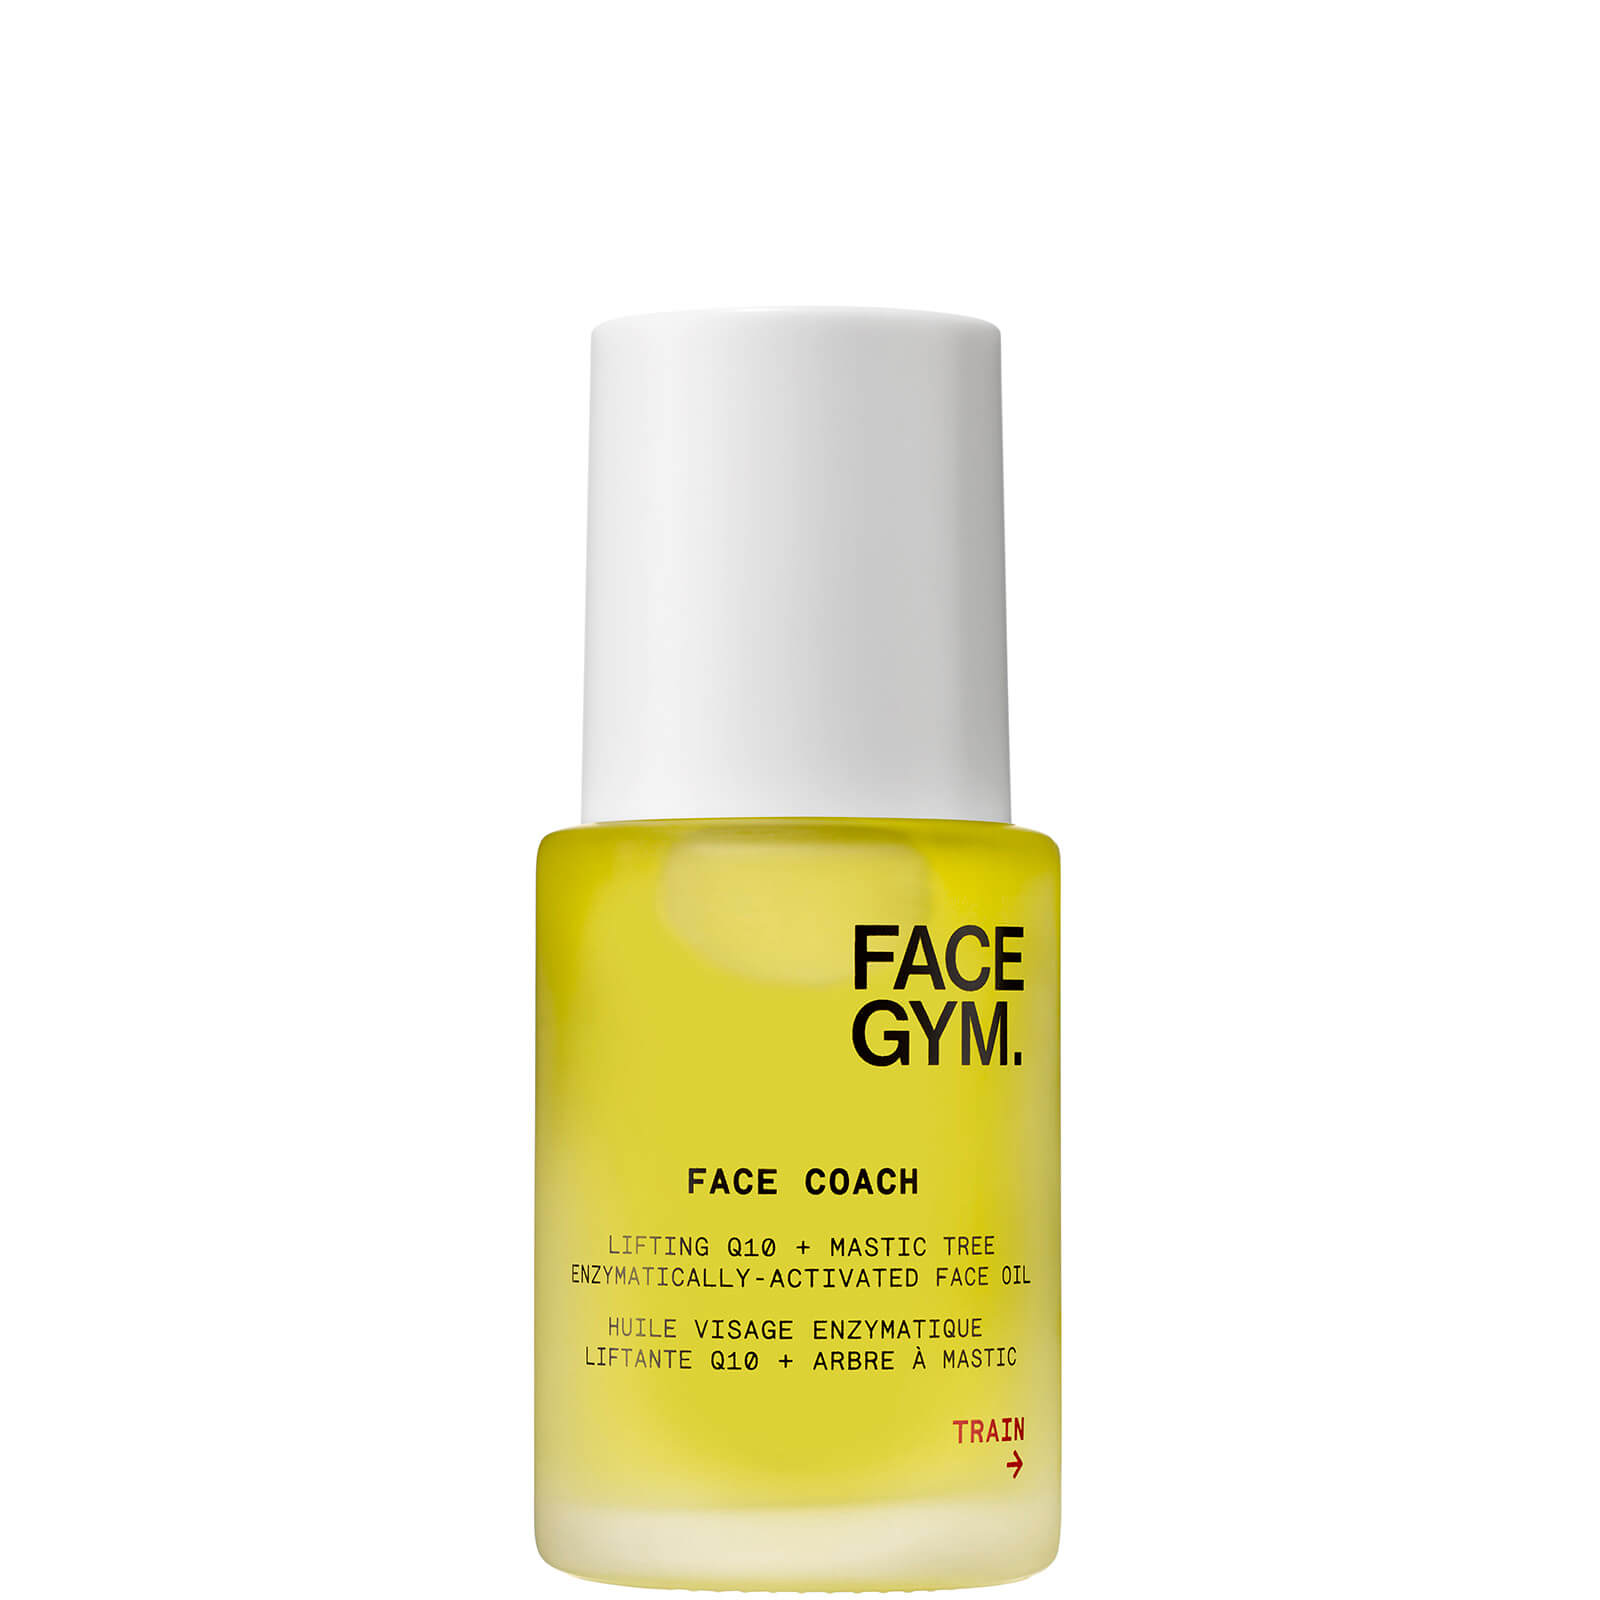 facegym face coach lifting q10 and mastic tree enzymatically-activated face oil (various sizes) - 30ml uomo